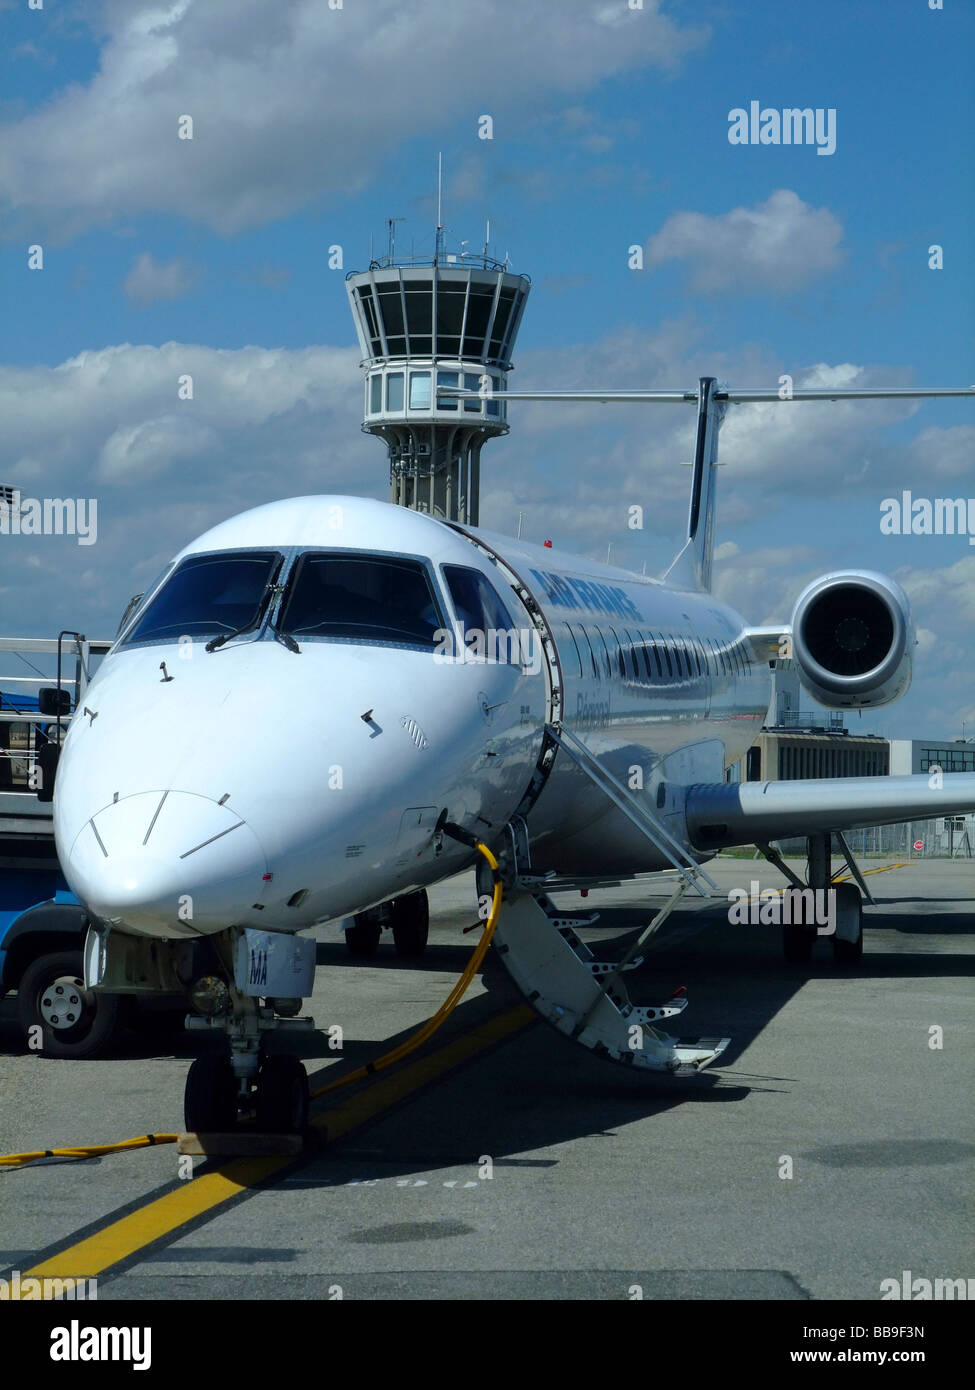 Brazilain Embraer ERJ-145 of Regional (flying for Air France) on the parking at Lyon Saint Exupery airport - France Stock Photo